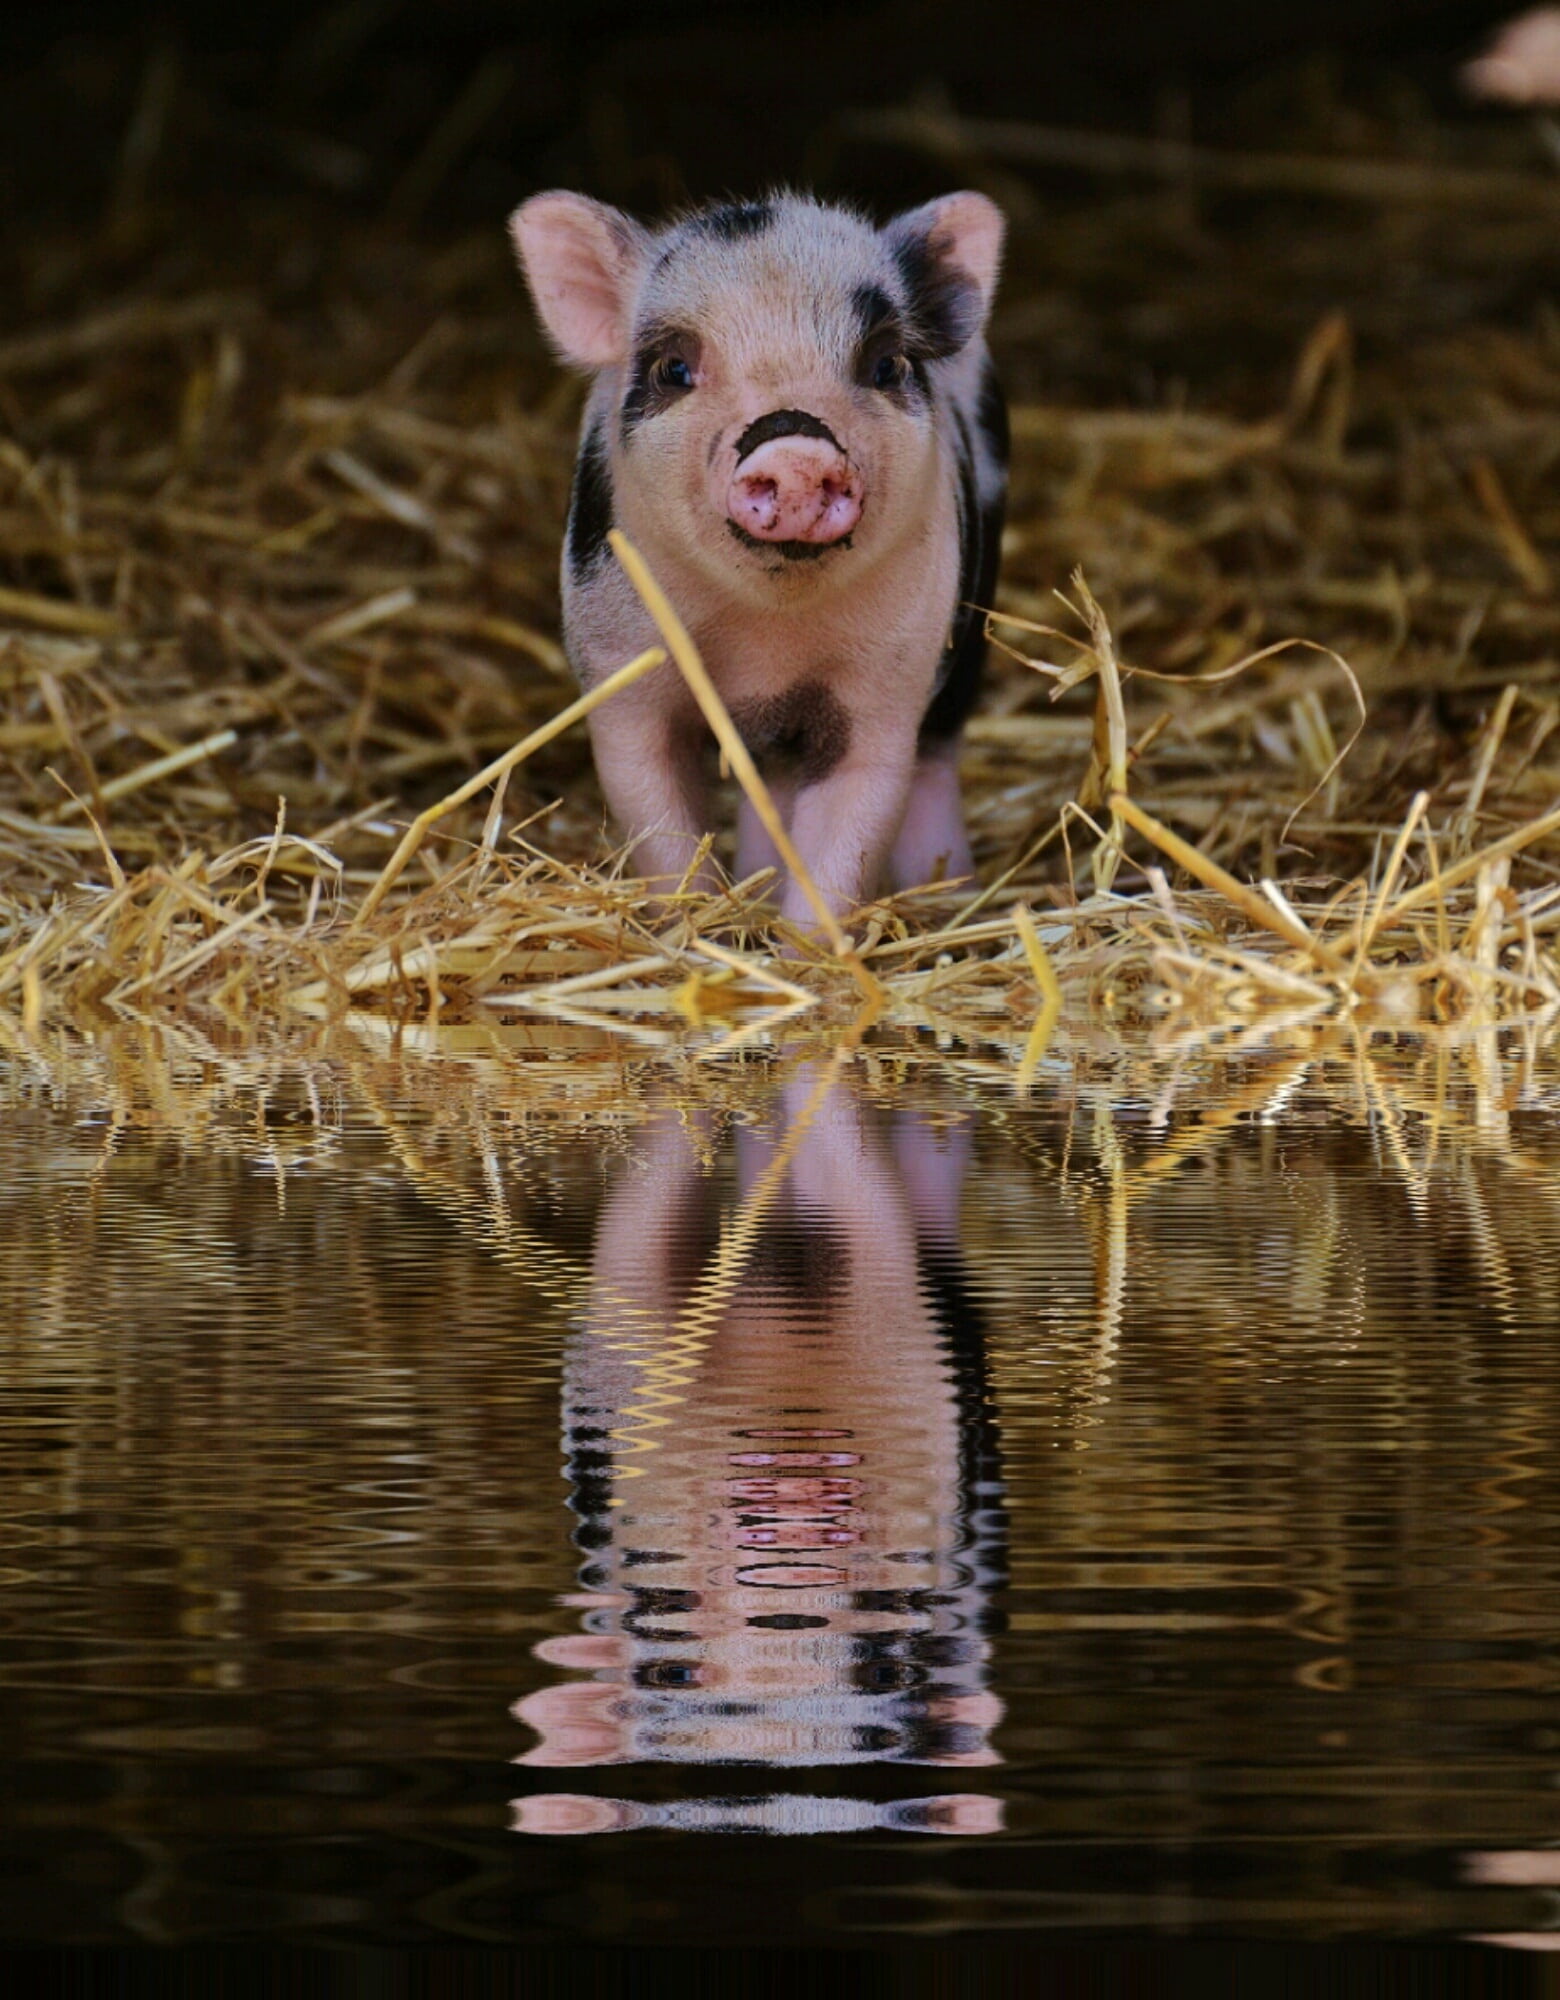 pink and black piglet on grass near water, mirroring, bank, wildpark poing